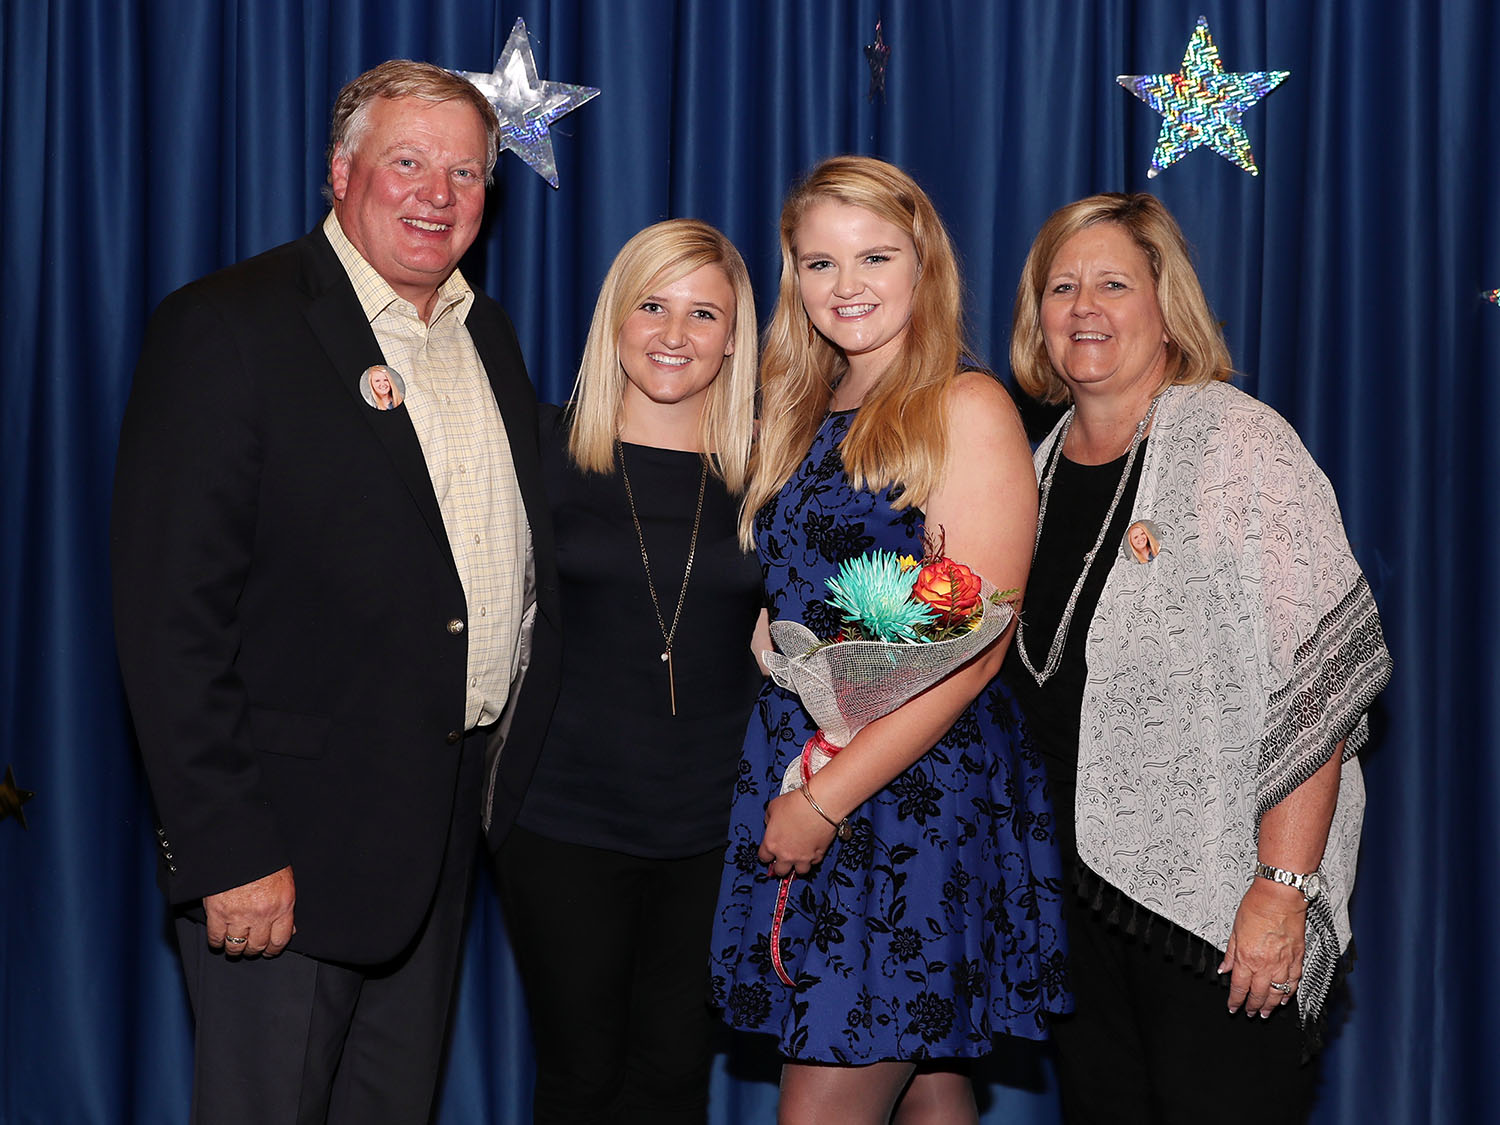 From left, UNK Chancellor Doug Kristensen is pictured with his daughters Morgan and Paige and wife Terri Harder during homecoming festivities in 2018. Paige was a finalist for homecoming queen that year.